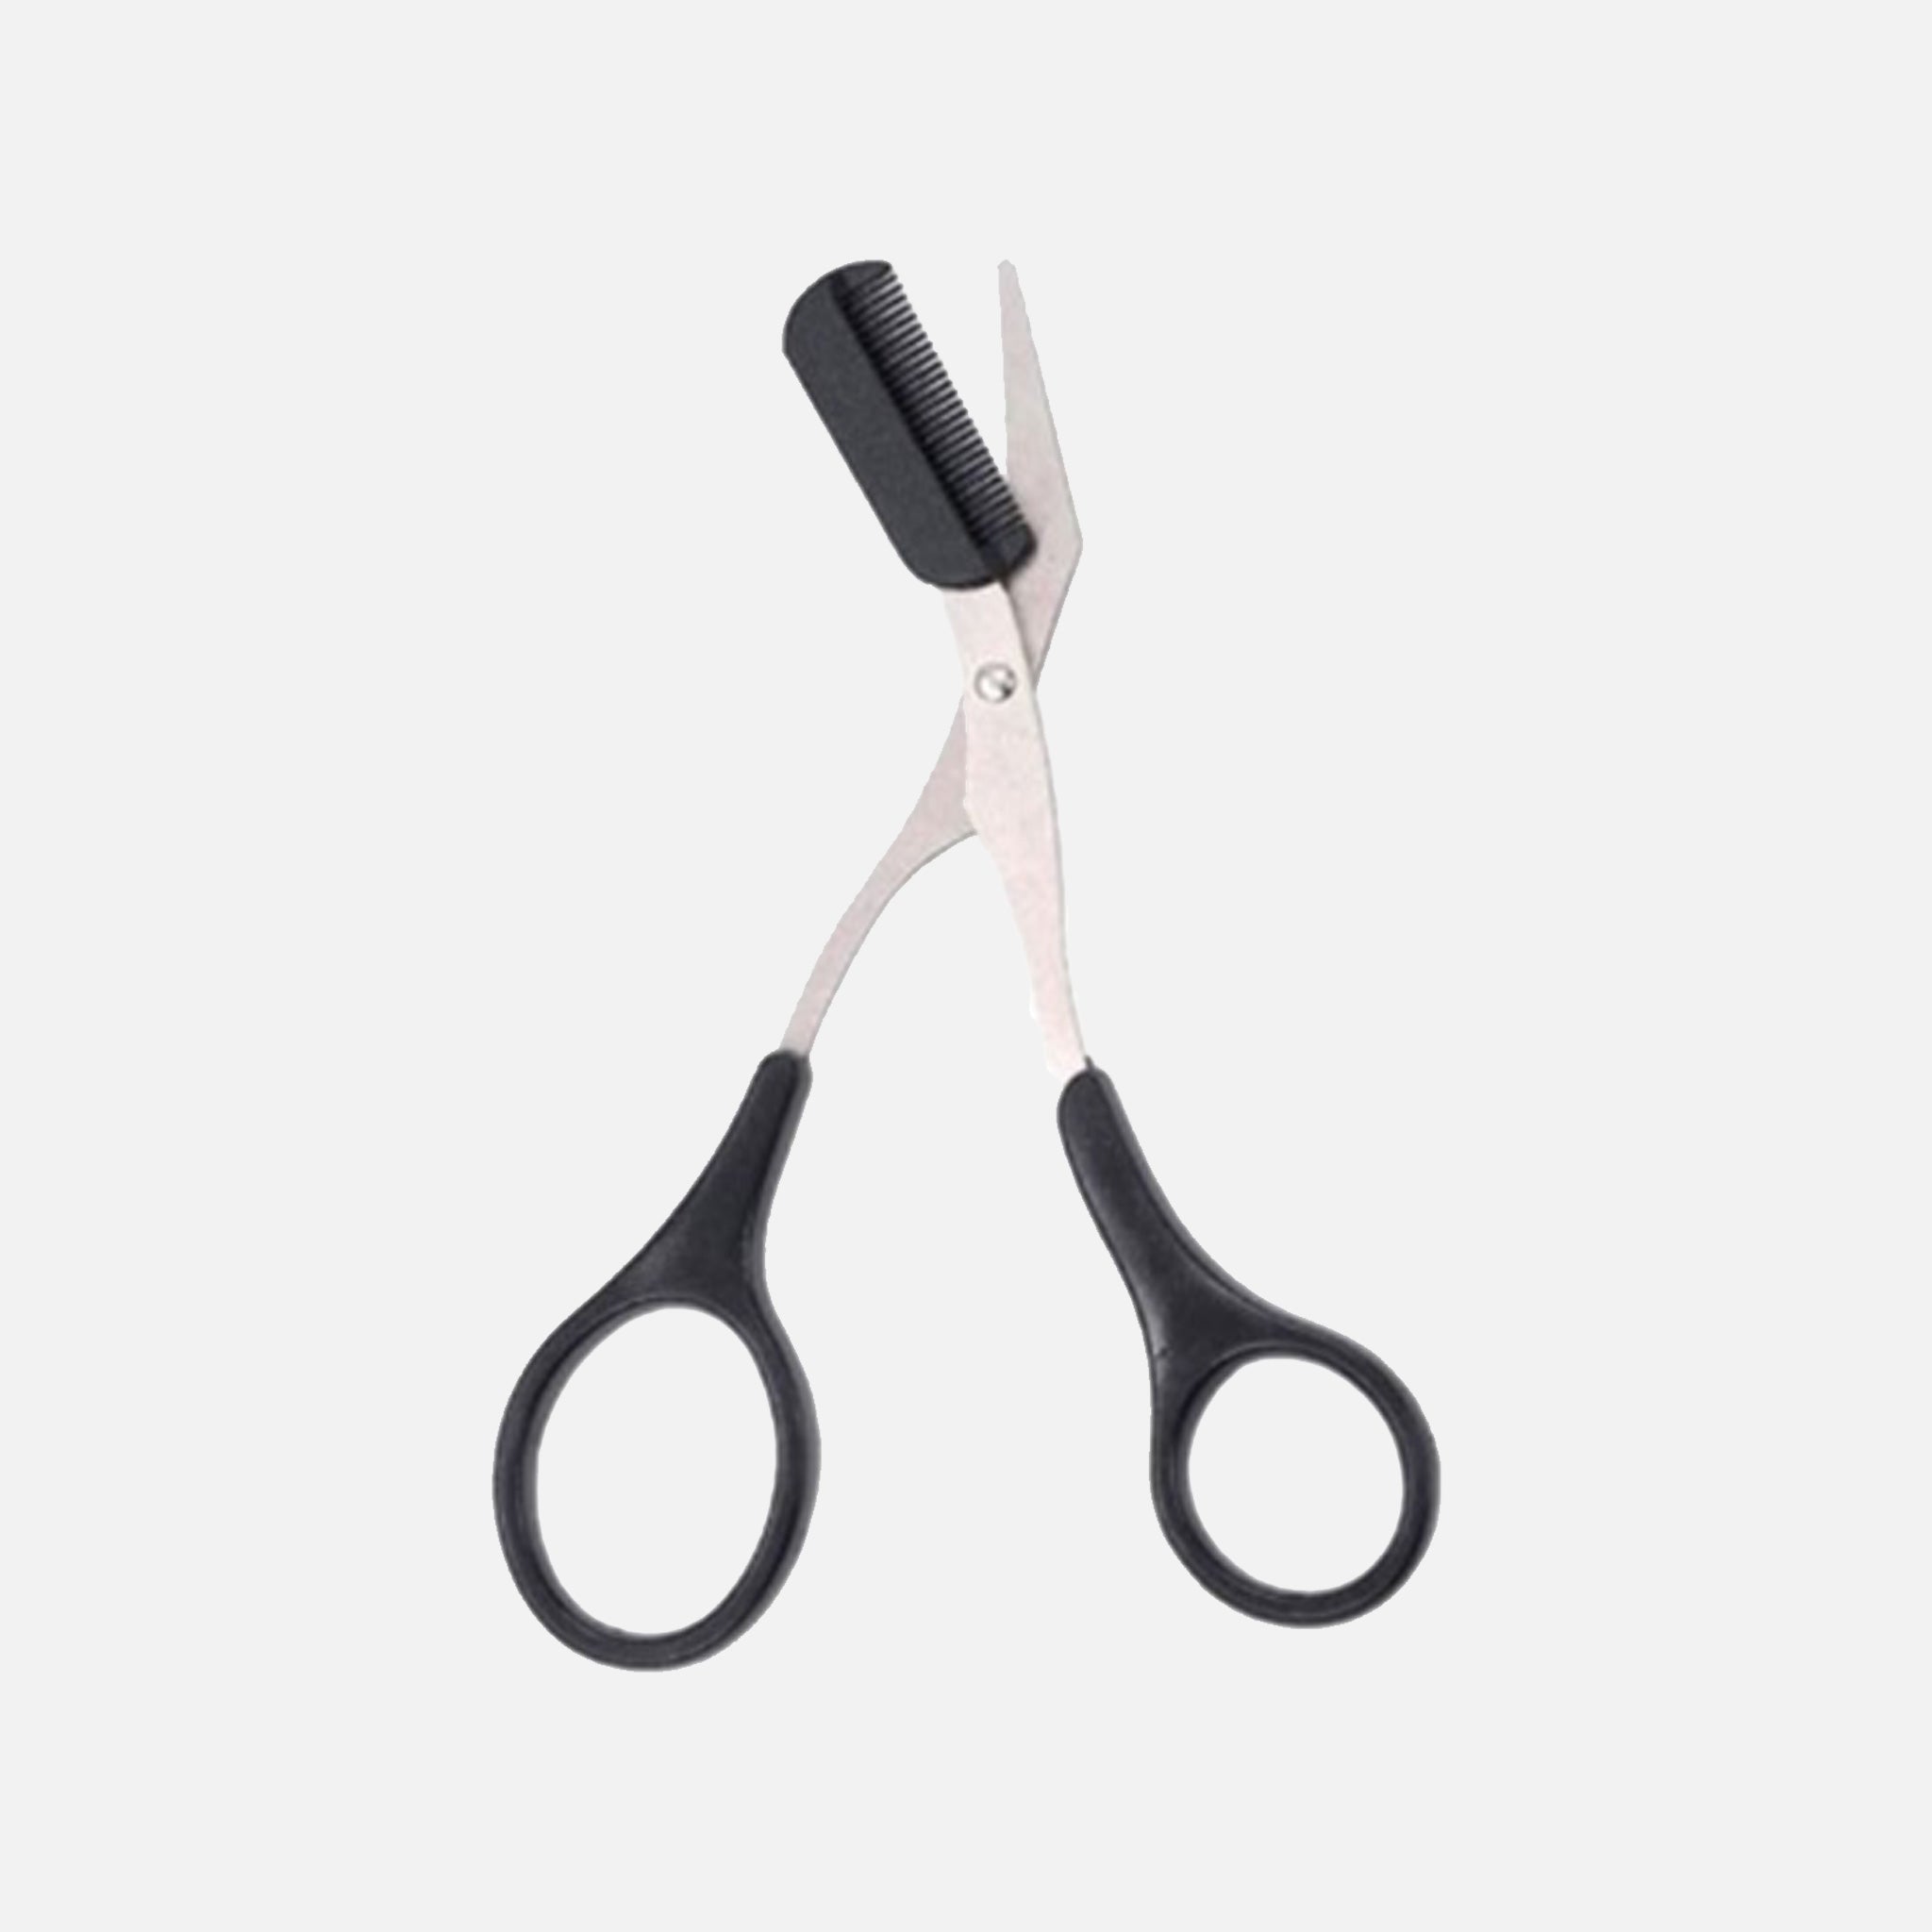 DARKNESS Eyebrow Shear Scissors With Comb 1pc